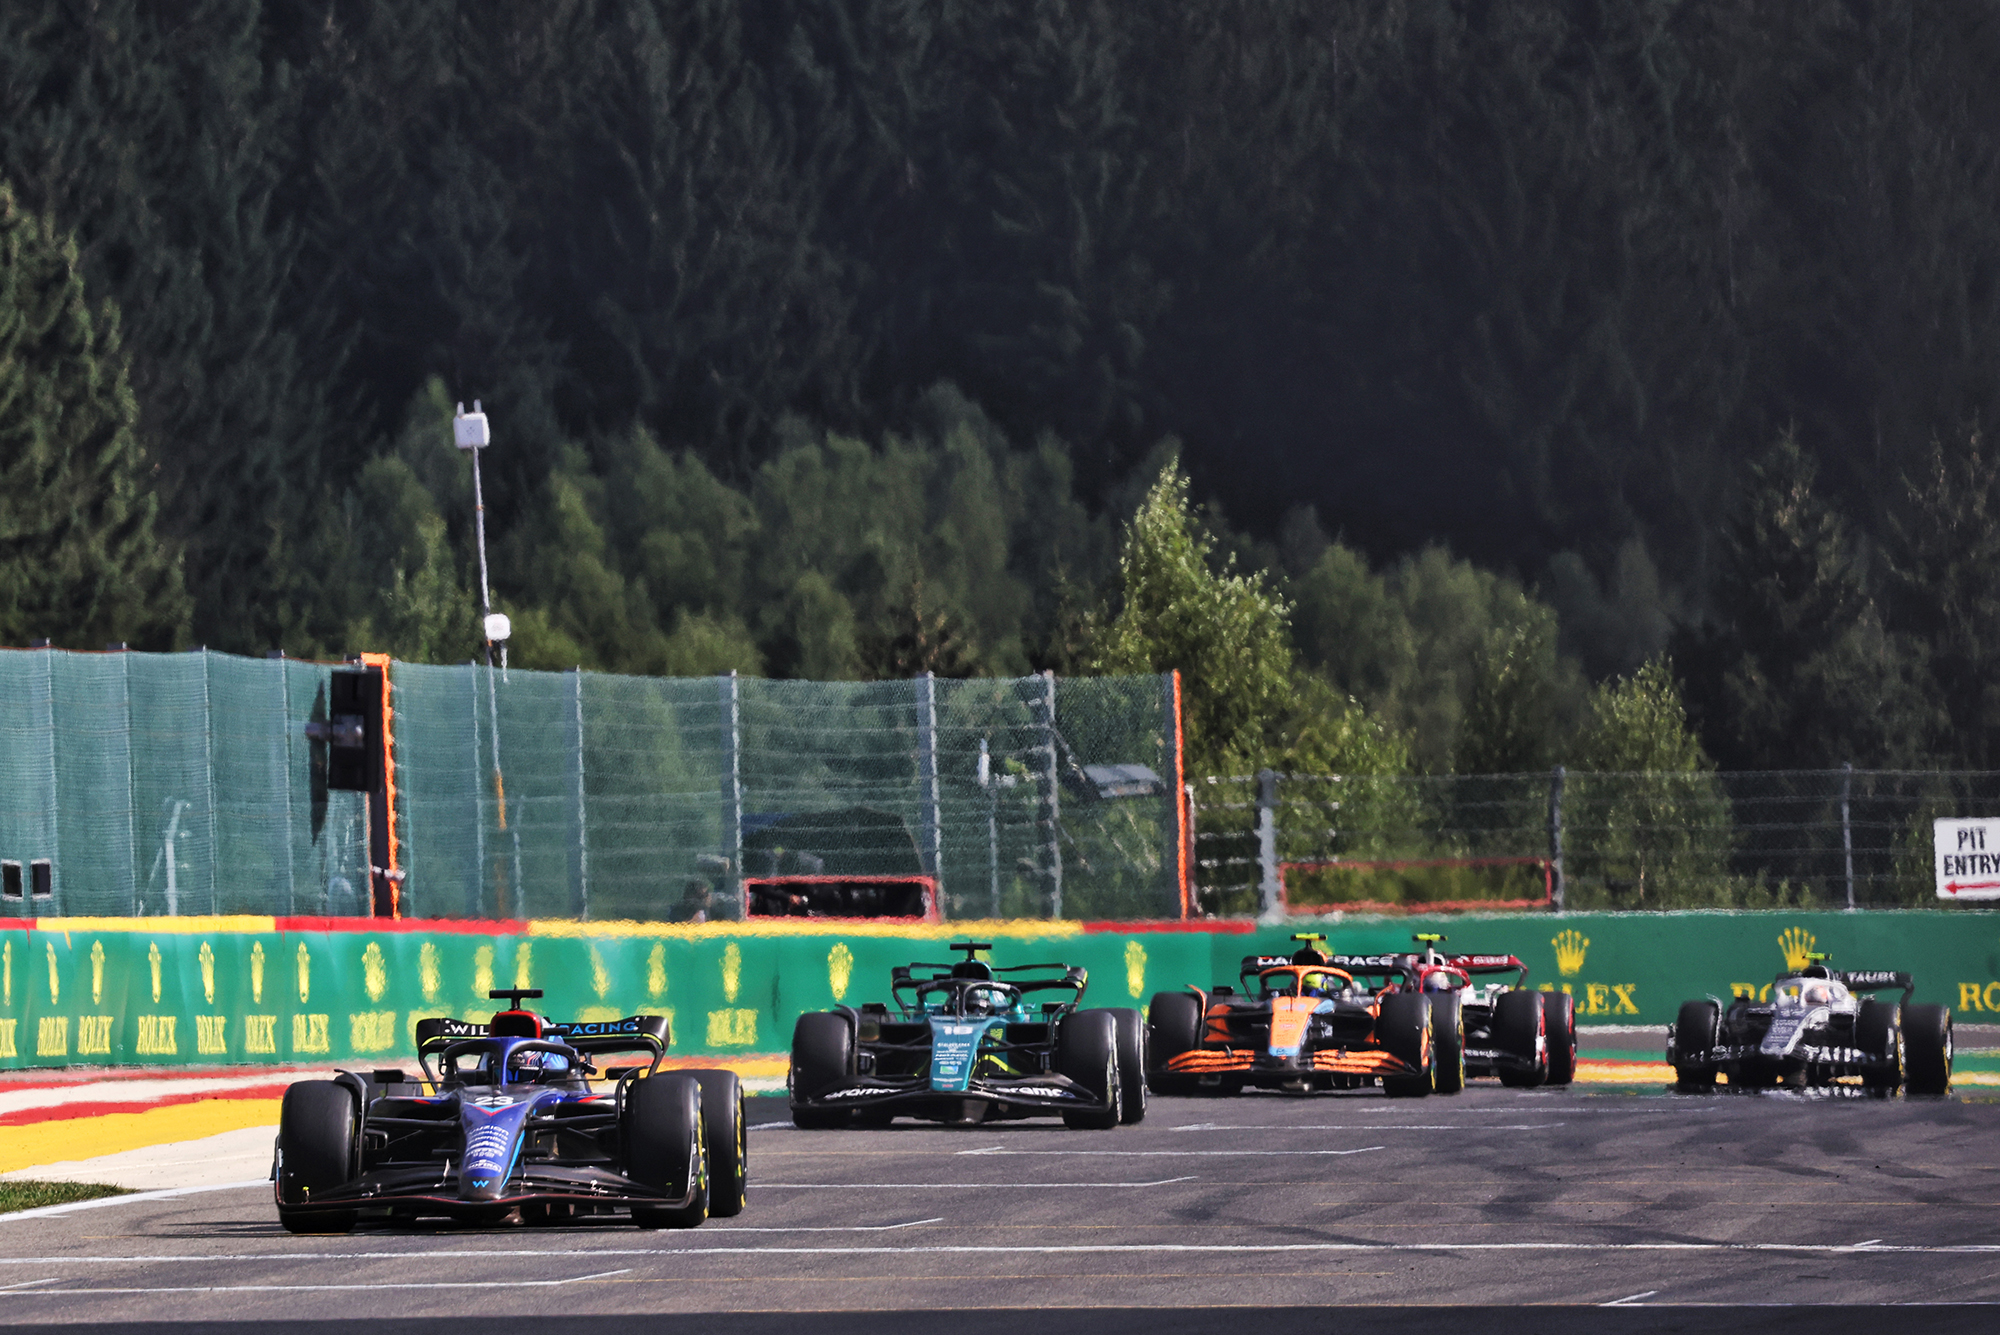 why a usual spa f1 underdog rocketship has been grounded